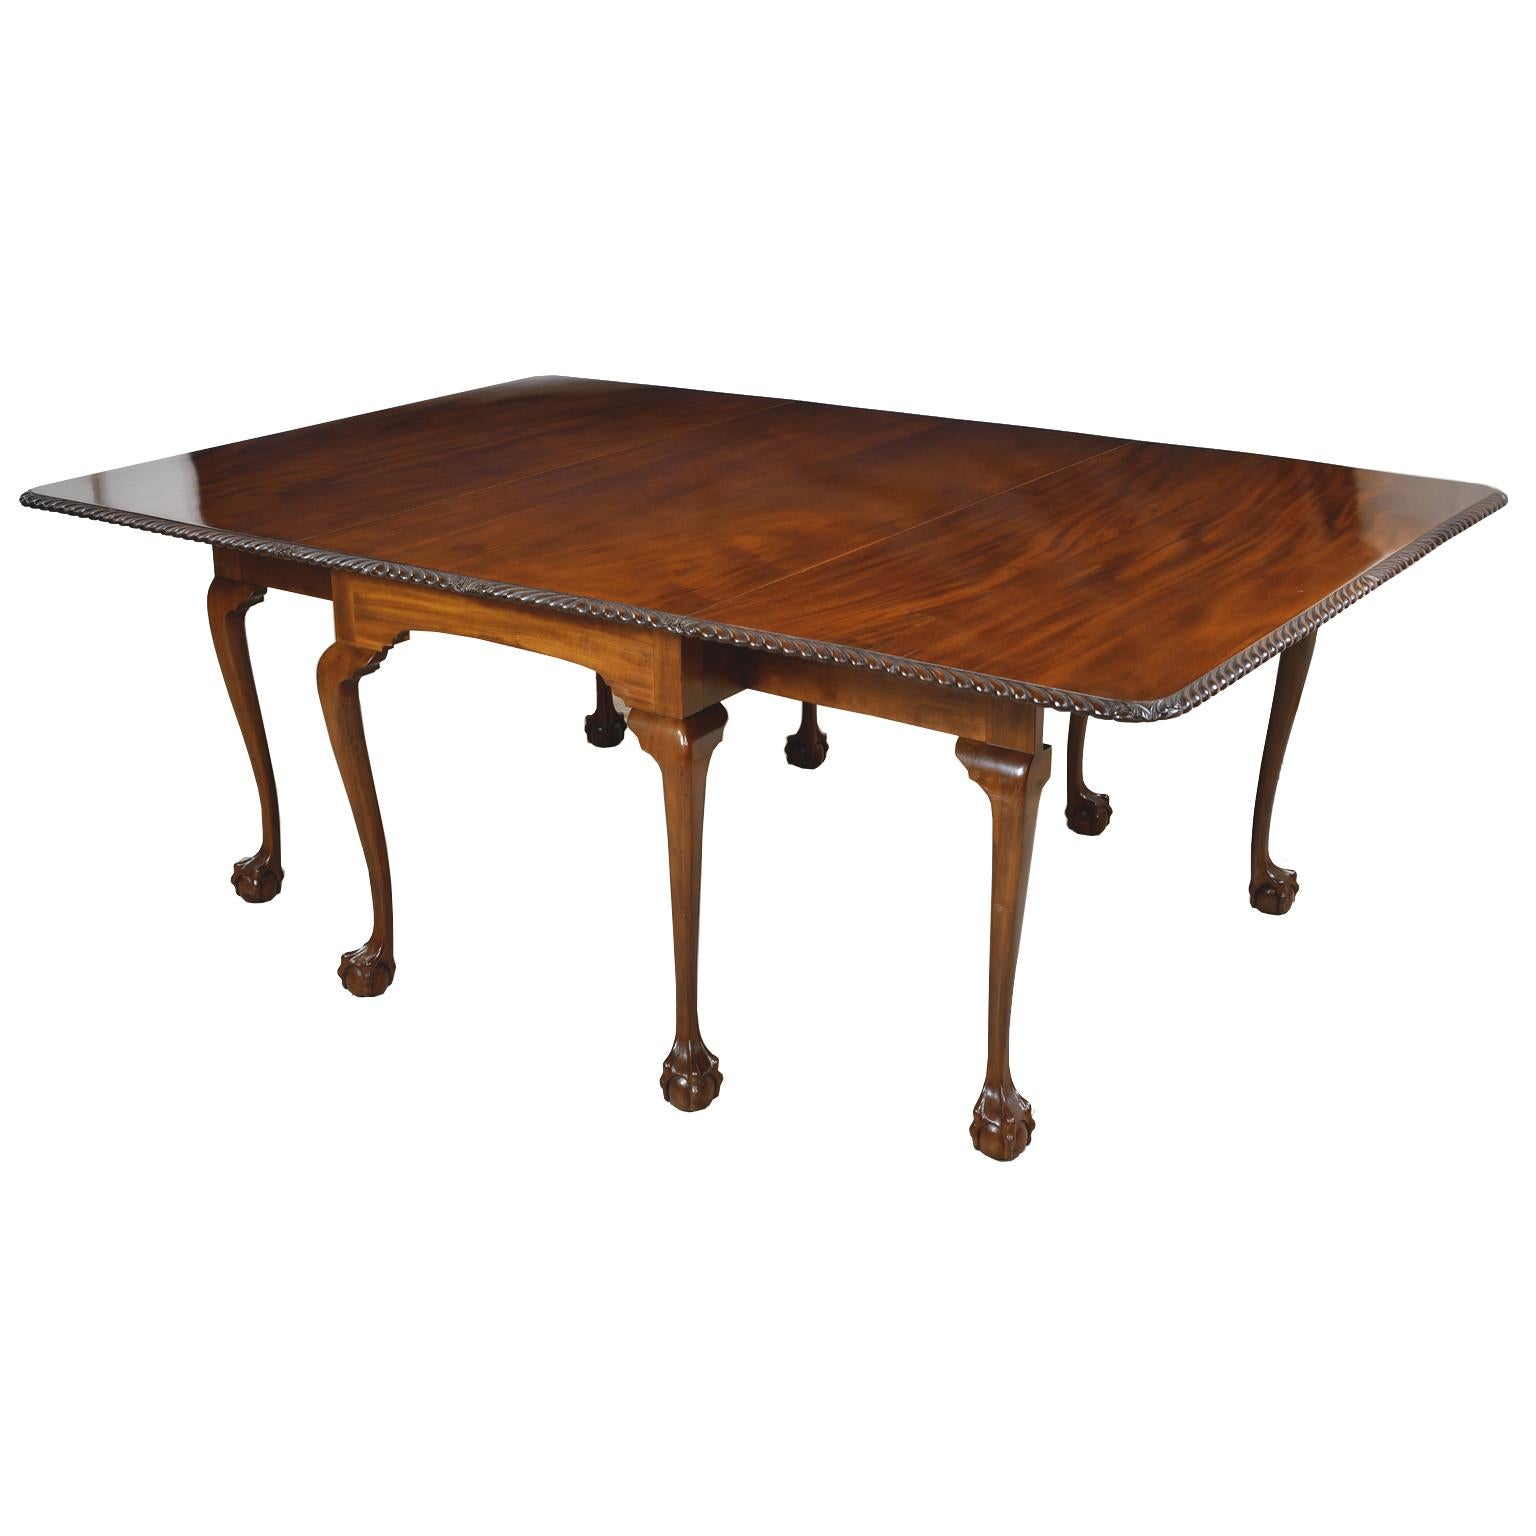 19th Century Large Centennial Queen Anne-Style Drop-Leaf Dining Table Philadelphia circa 1880 For Sale